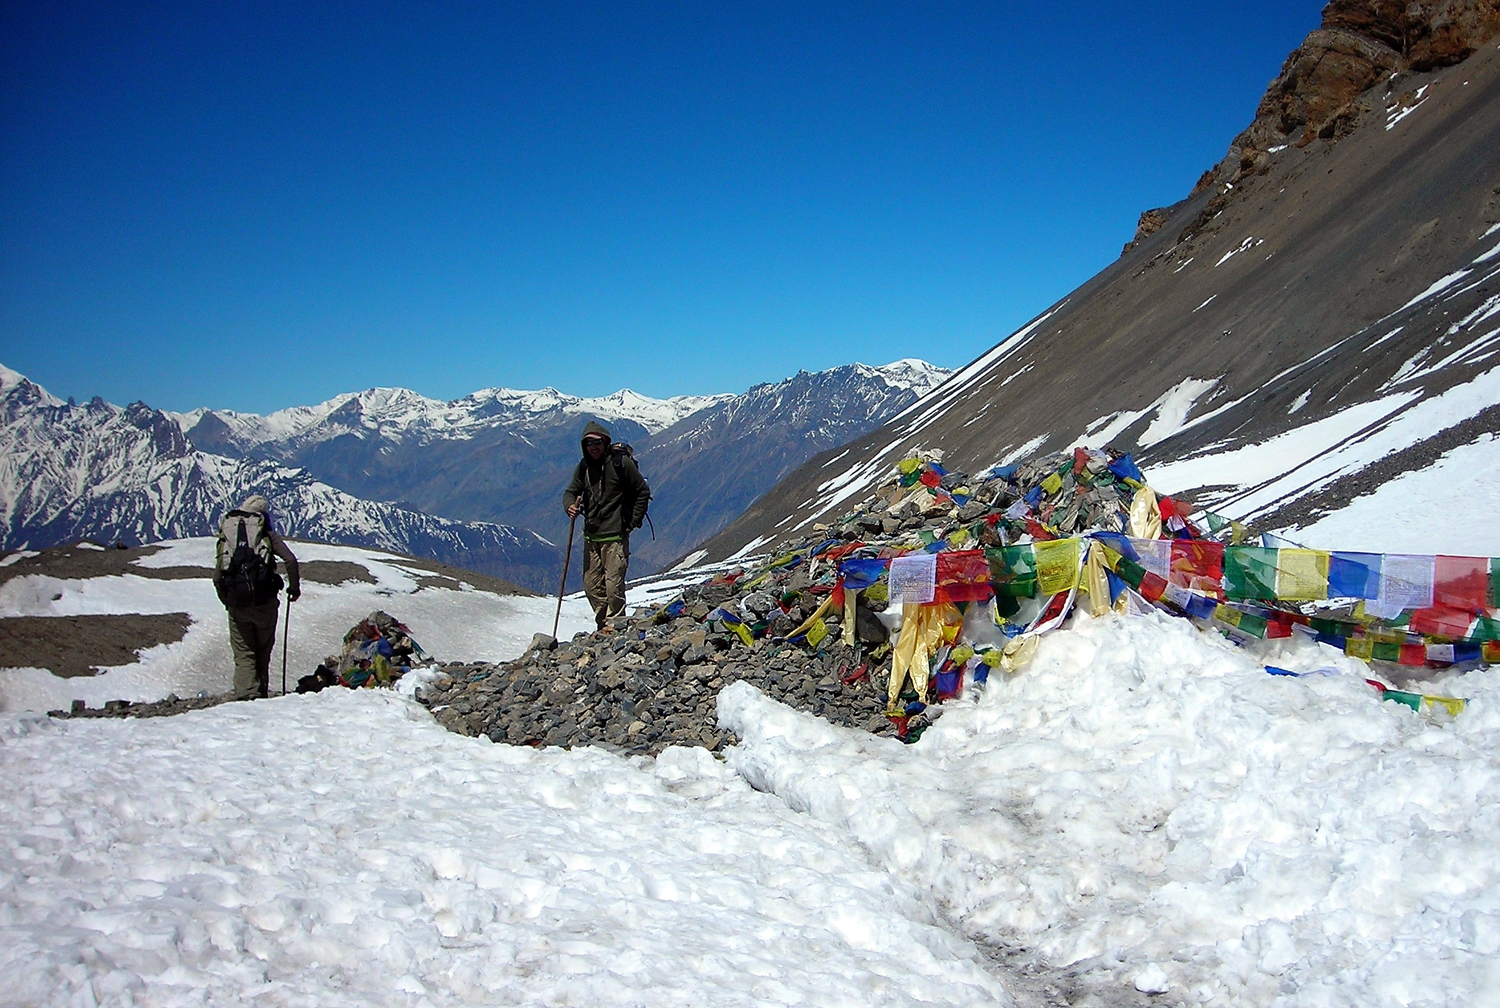 Annapurna Circuit Trek – A Complete Guide with Itinerary